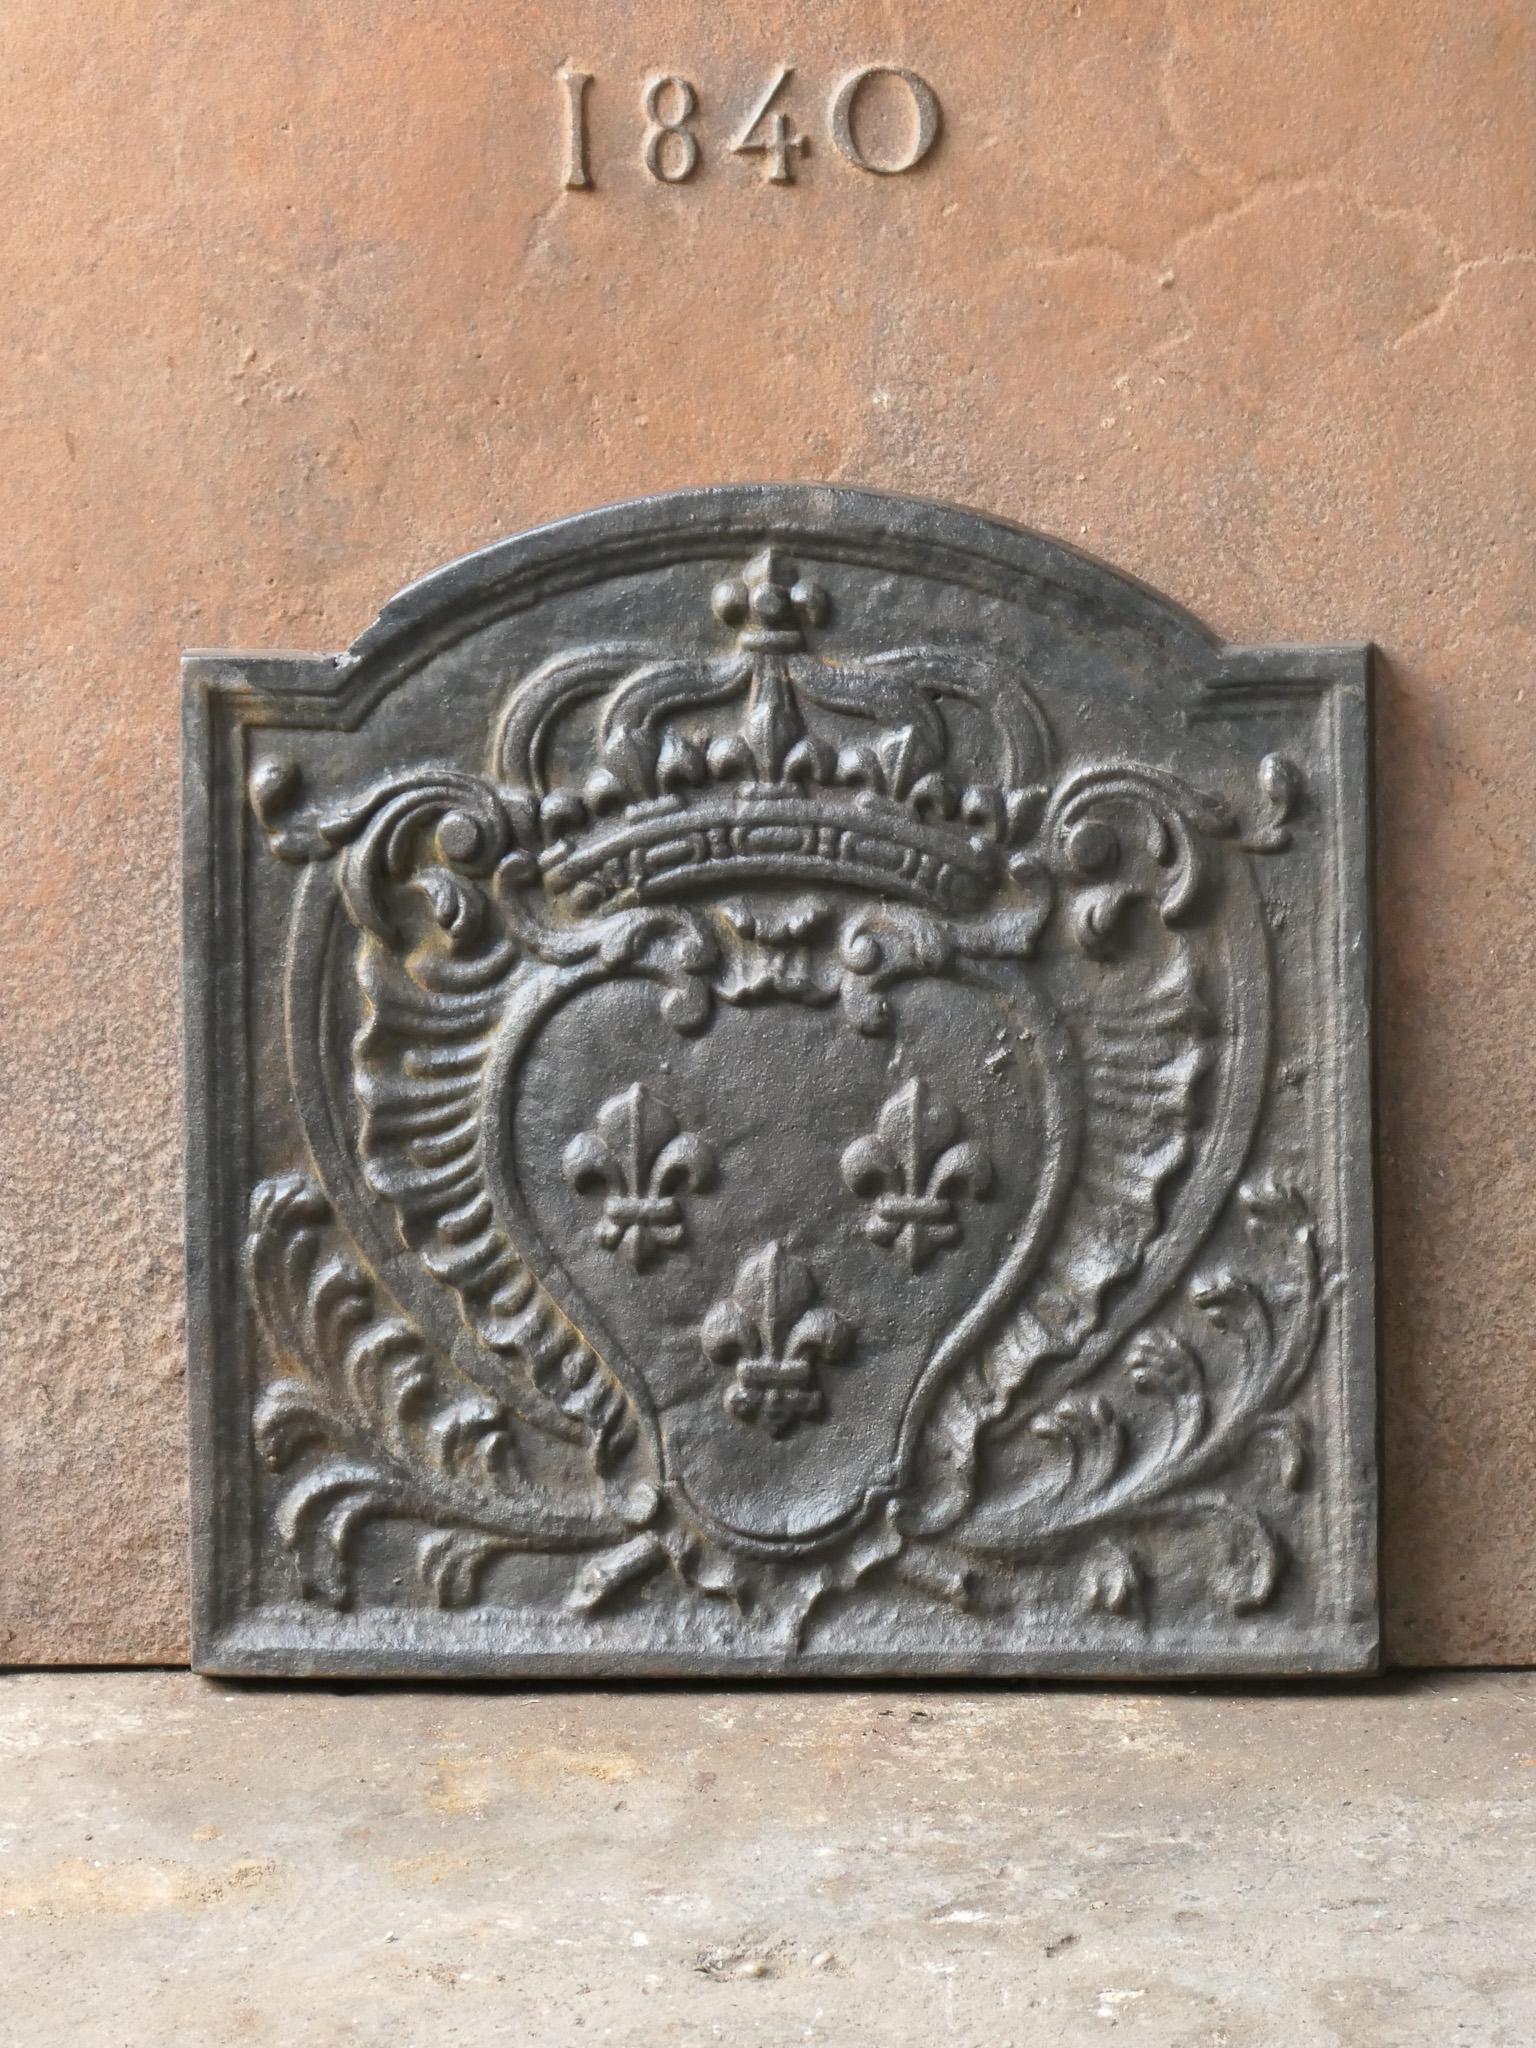 20th century French Louis XV style fireback with the Arms of France. A coat of arms of the House of Bourbon, an originally French royal house that became a major dynasty in Europe. The house delivered kings for Spain (Navarra), France, both Sicilies